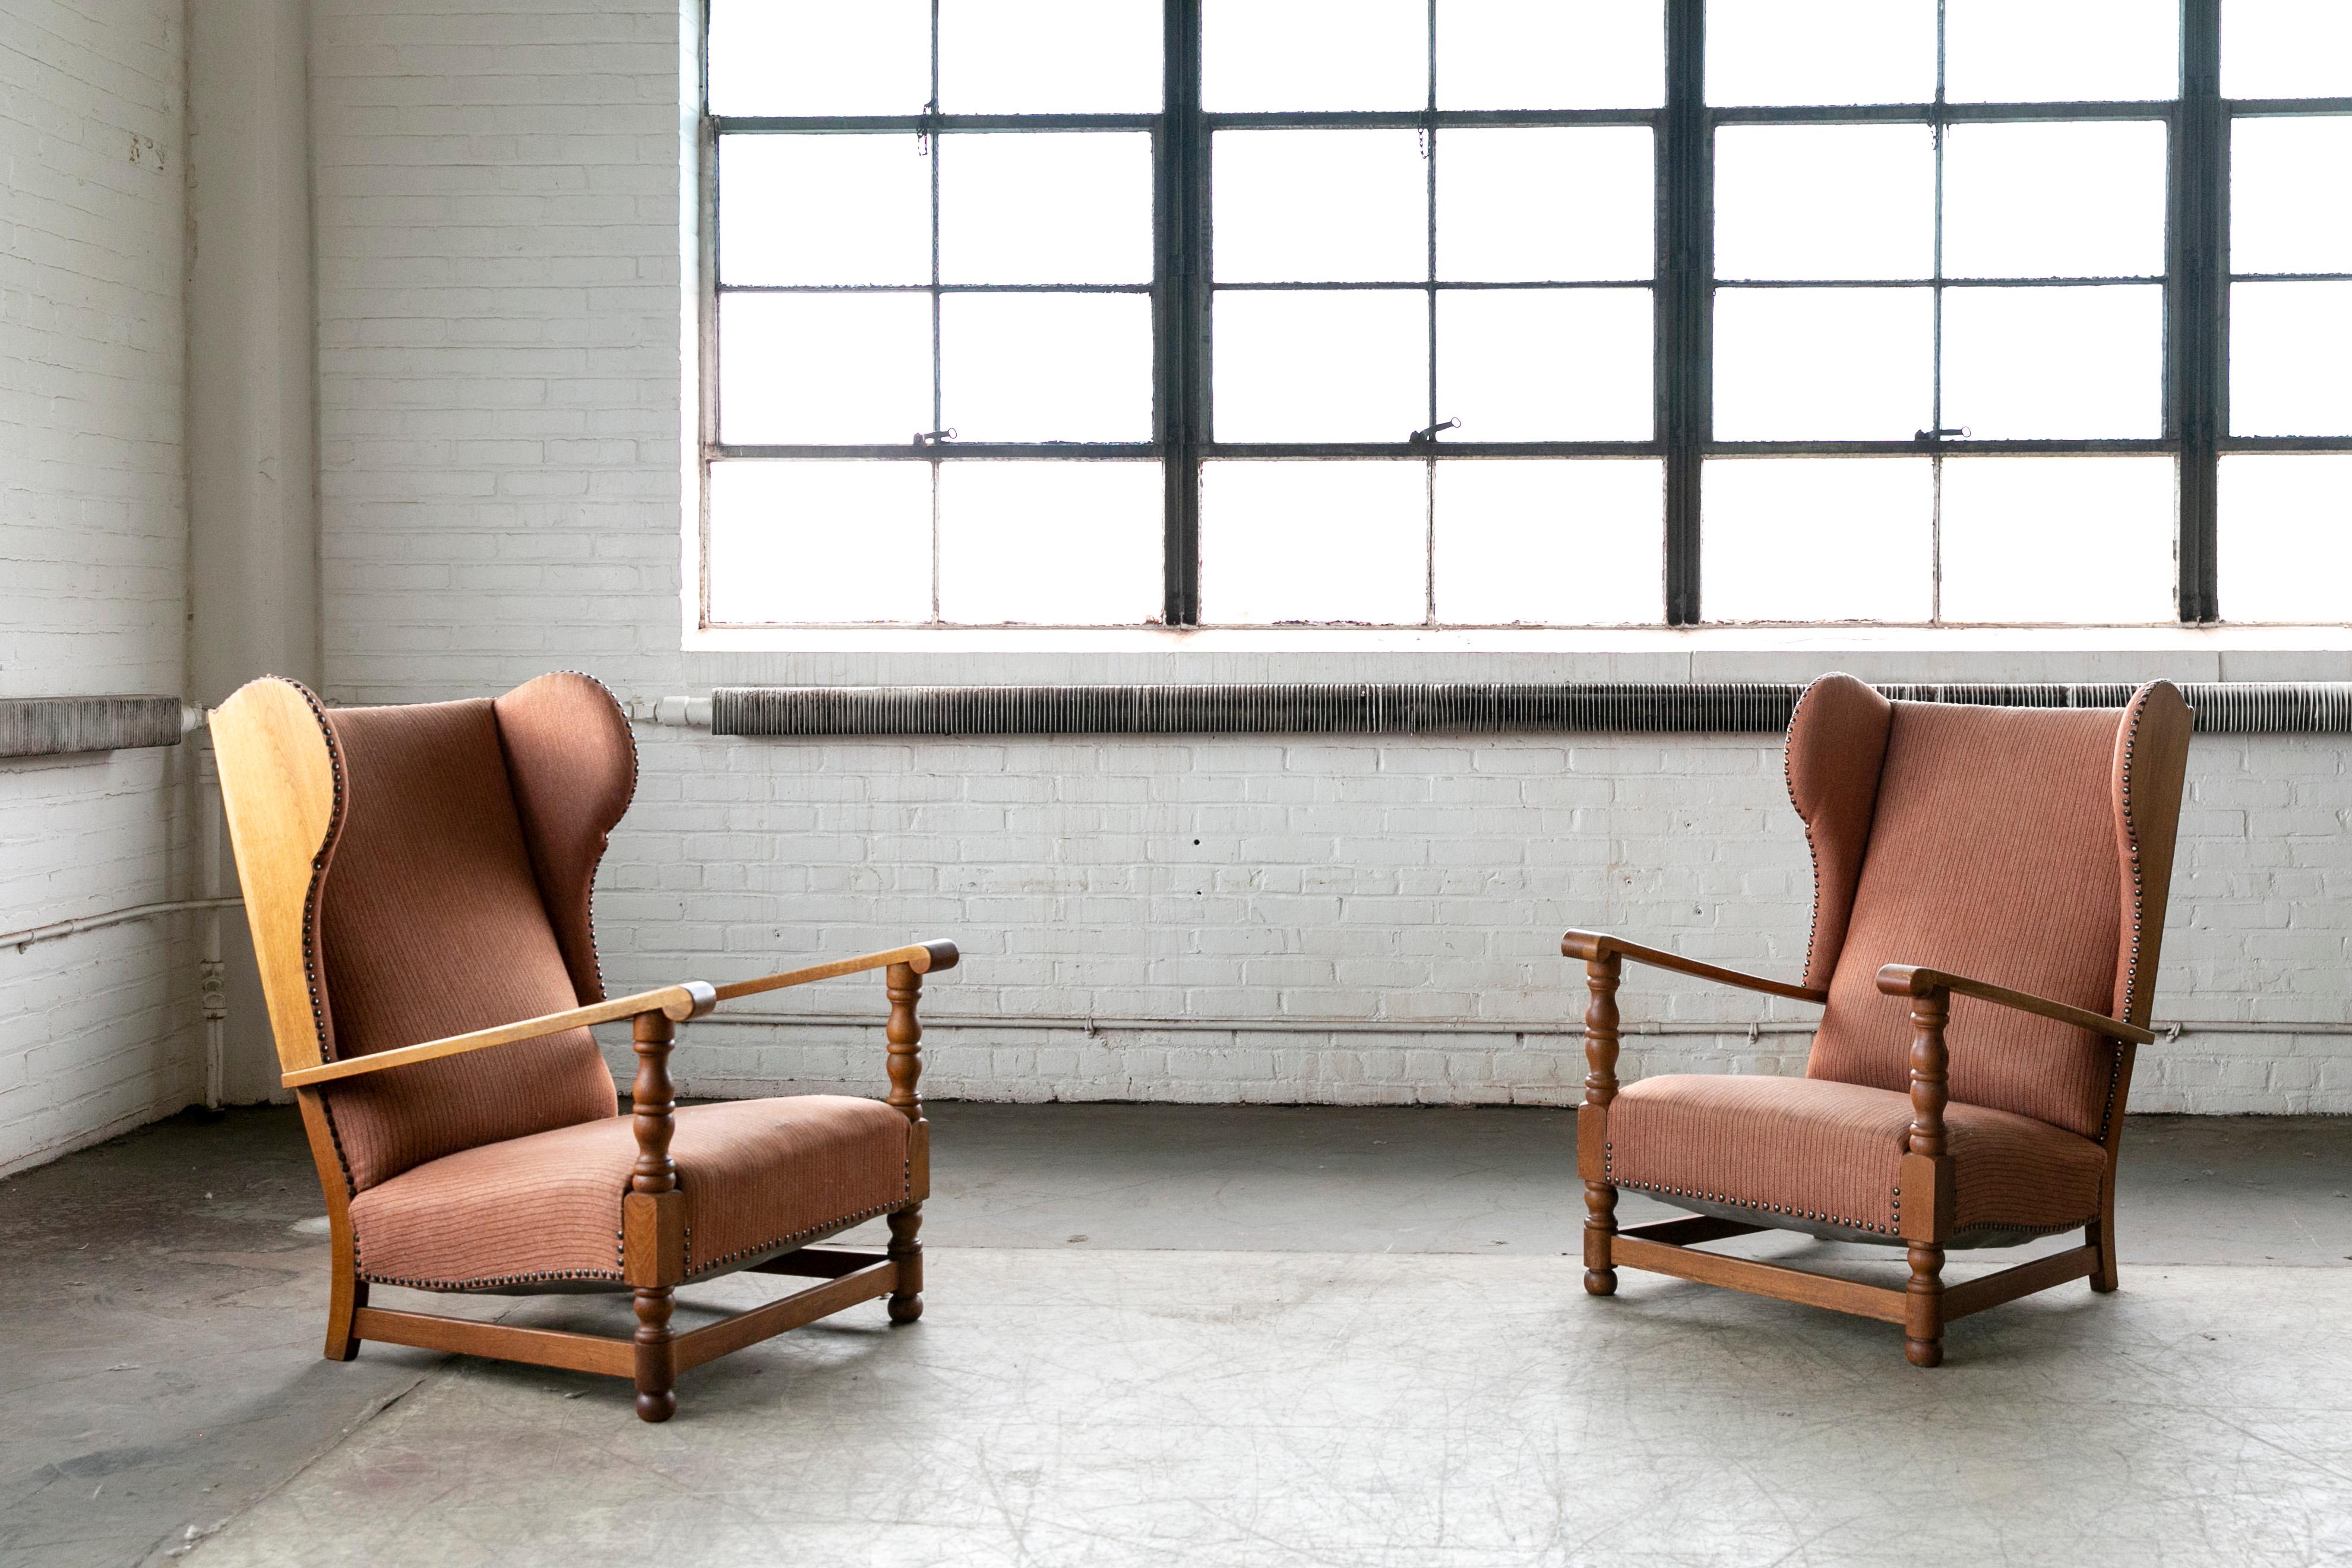 Great example of early Danish midcentury design, circa 1930s wingback chairs in hand carved solid oak with exposed sides and brass nails. Sturdy and strong construction of generous proportions making for a very comfortable chair. Nice patina